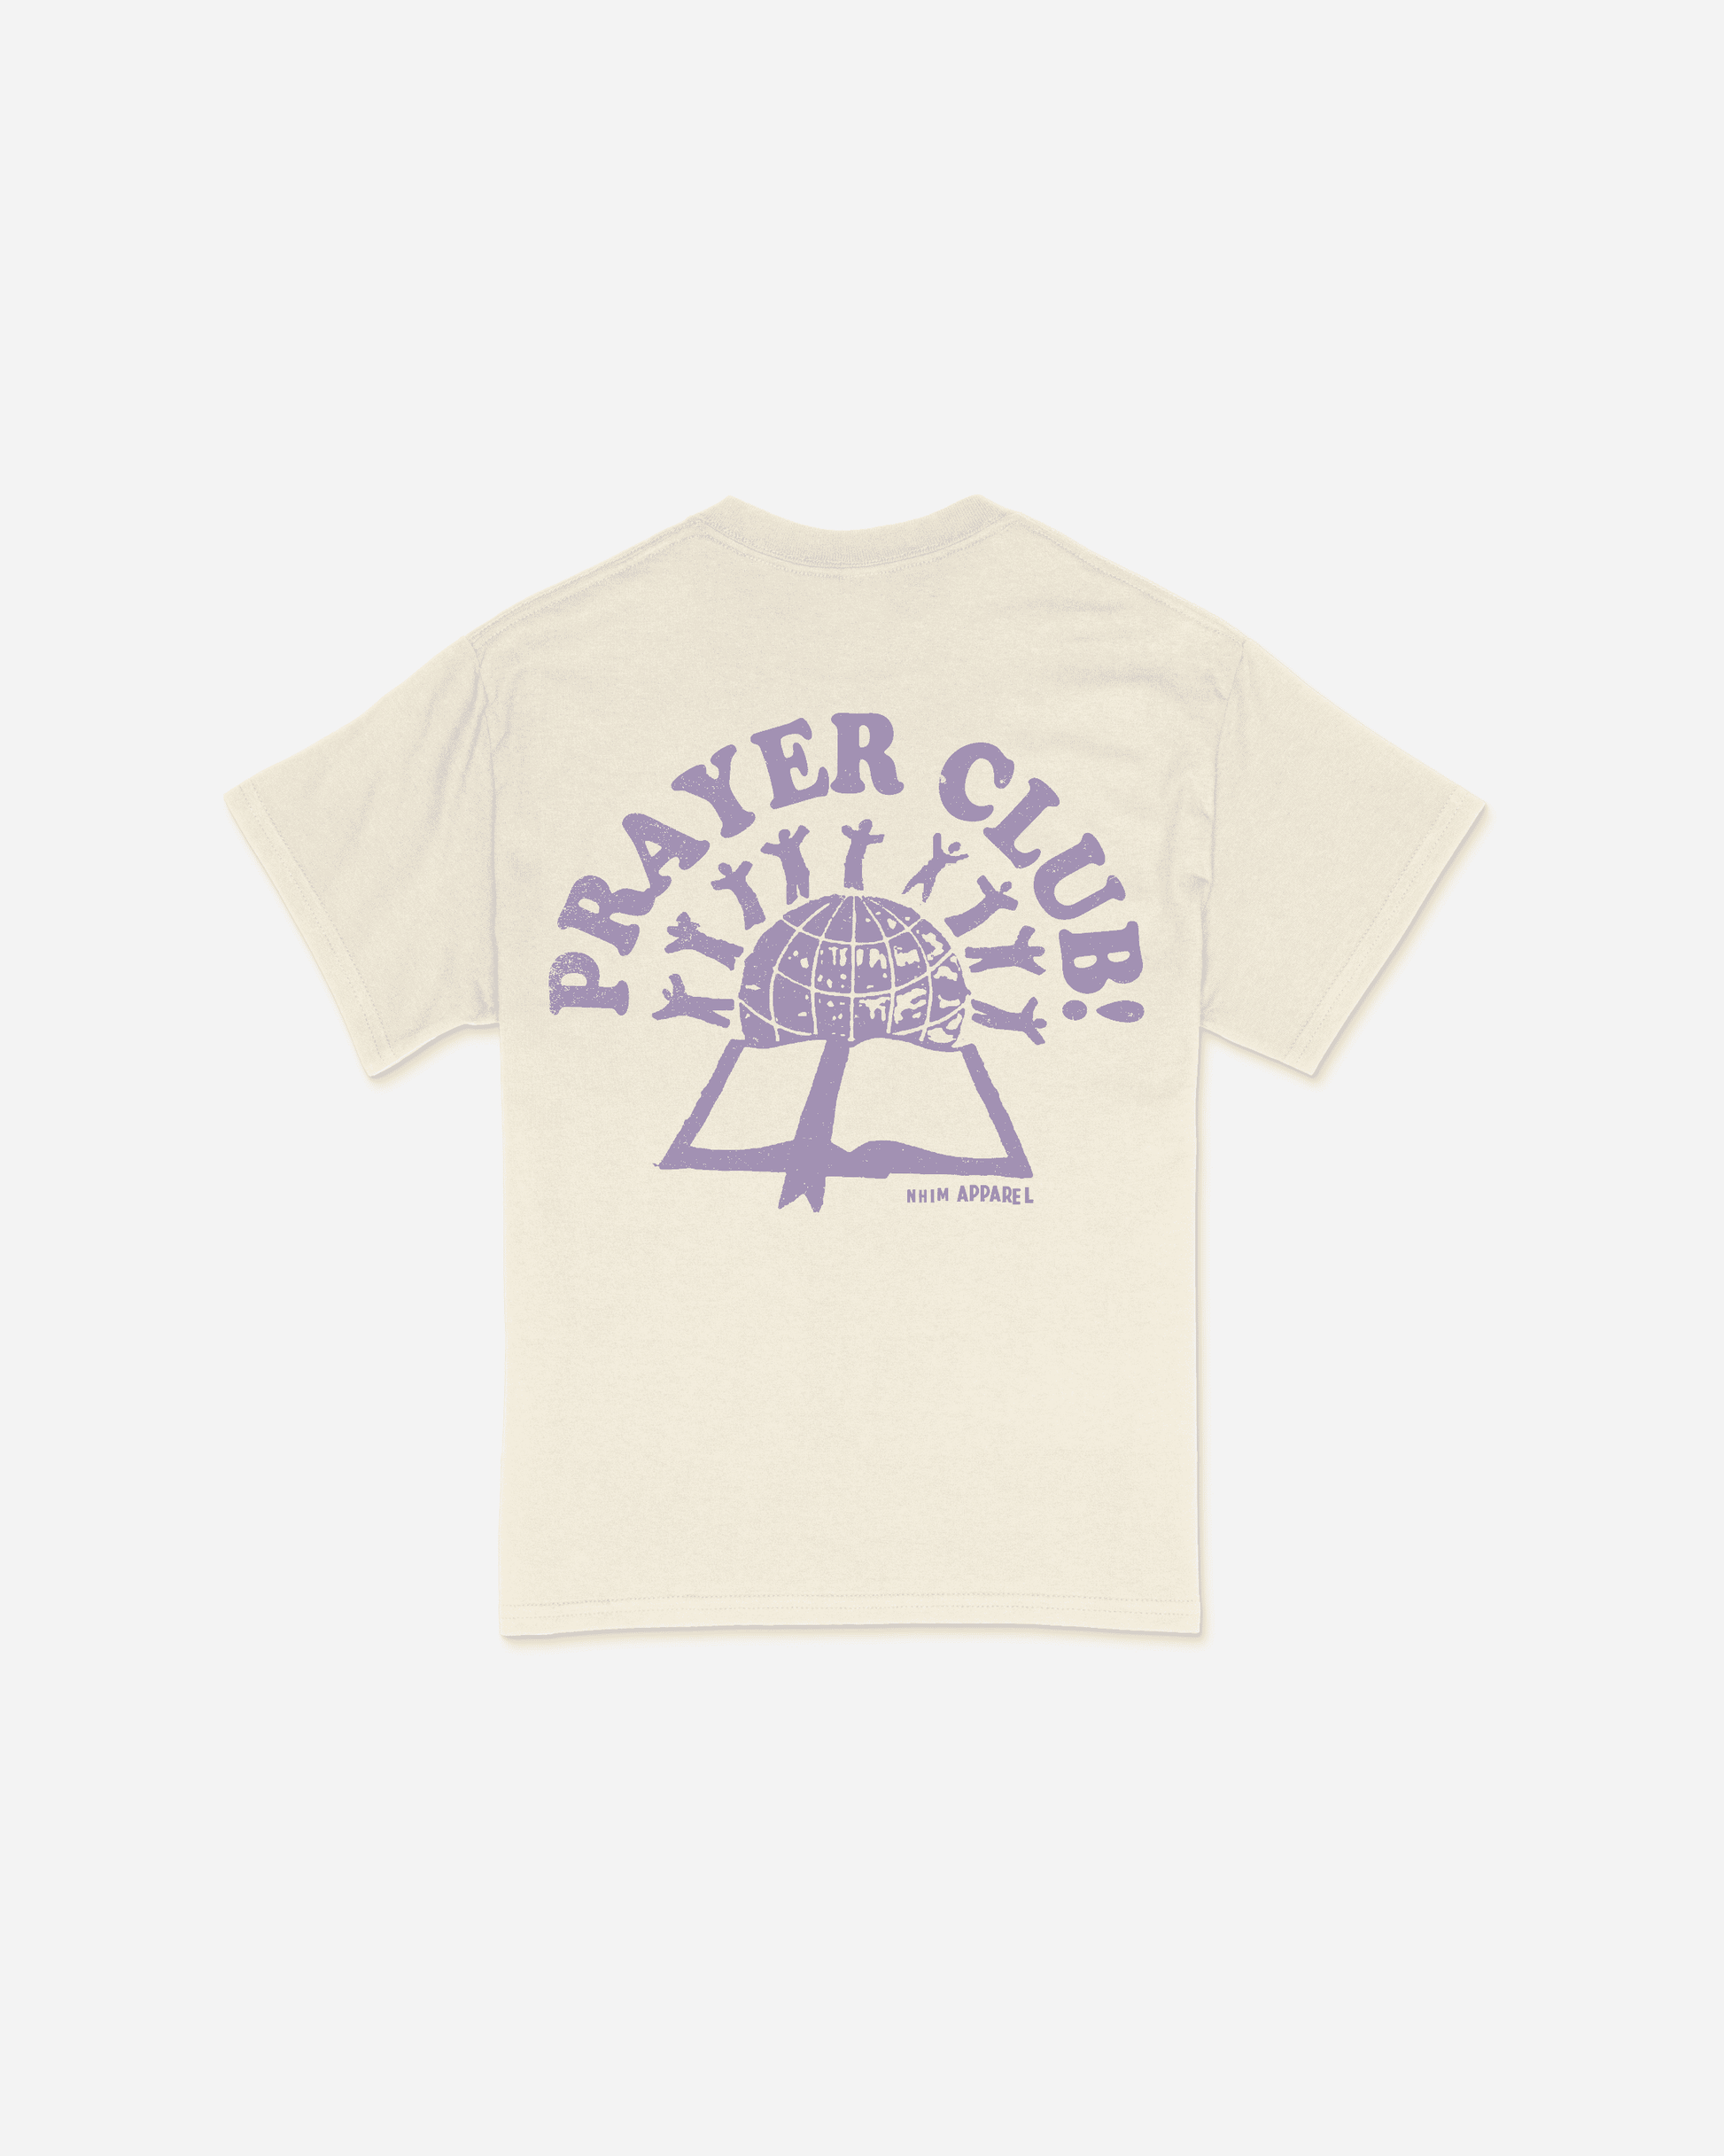 Prayer Club natural colored christian t shirt with purple graphic of people on the world with a bible made by NHIM APPAREL christian clothing brand